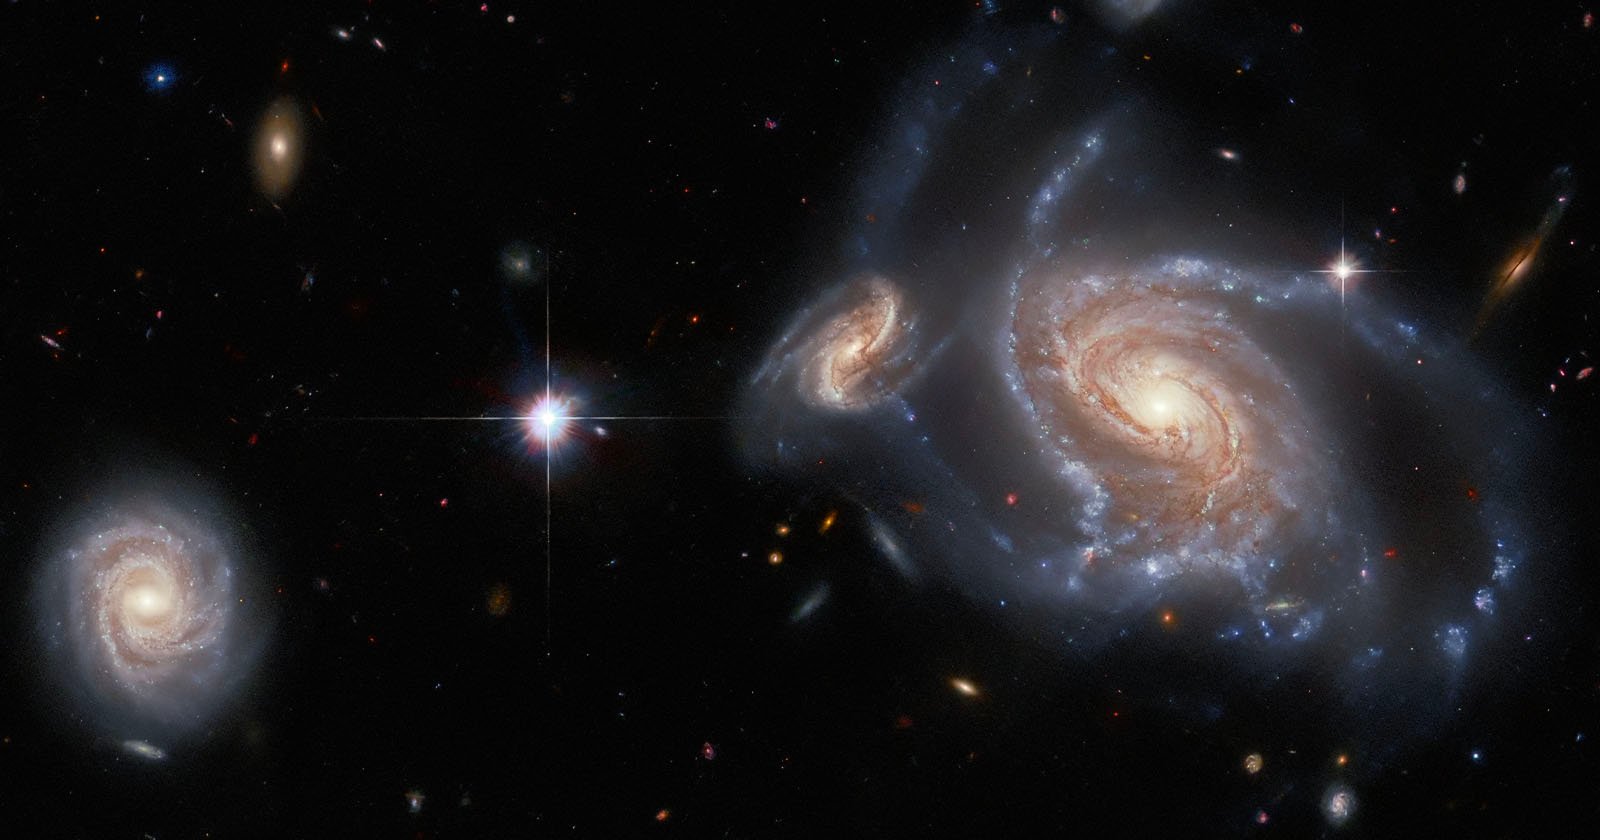  hubble latest shows how can hard interpret photos 